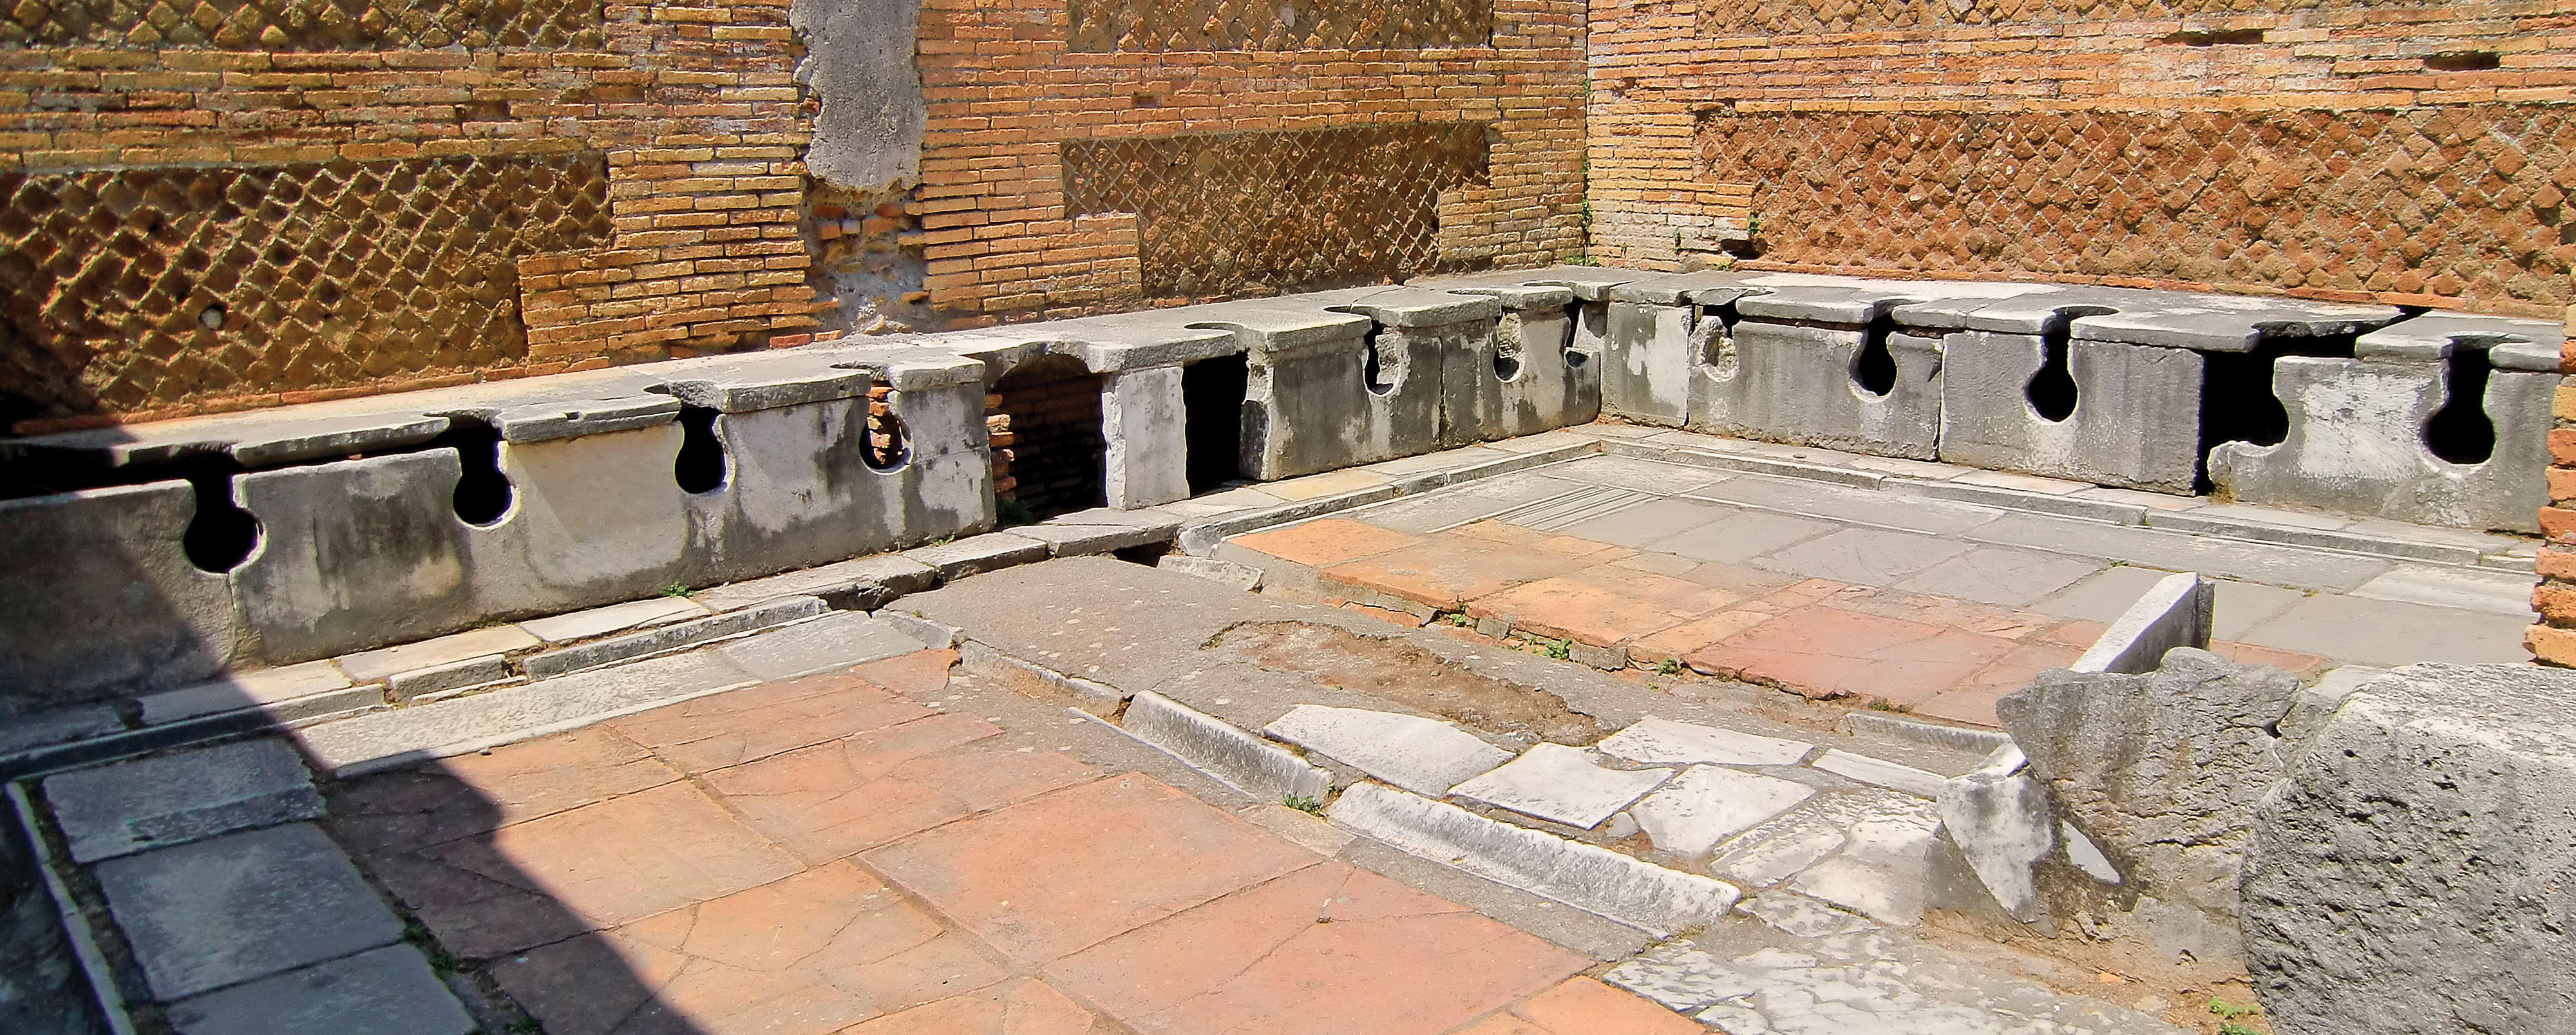 Remnants of a public latrine built in Ostia.